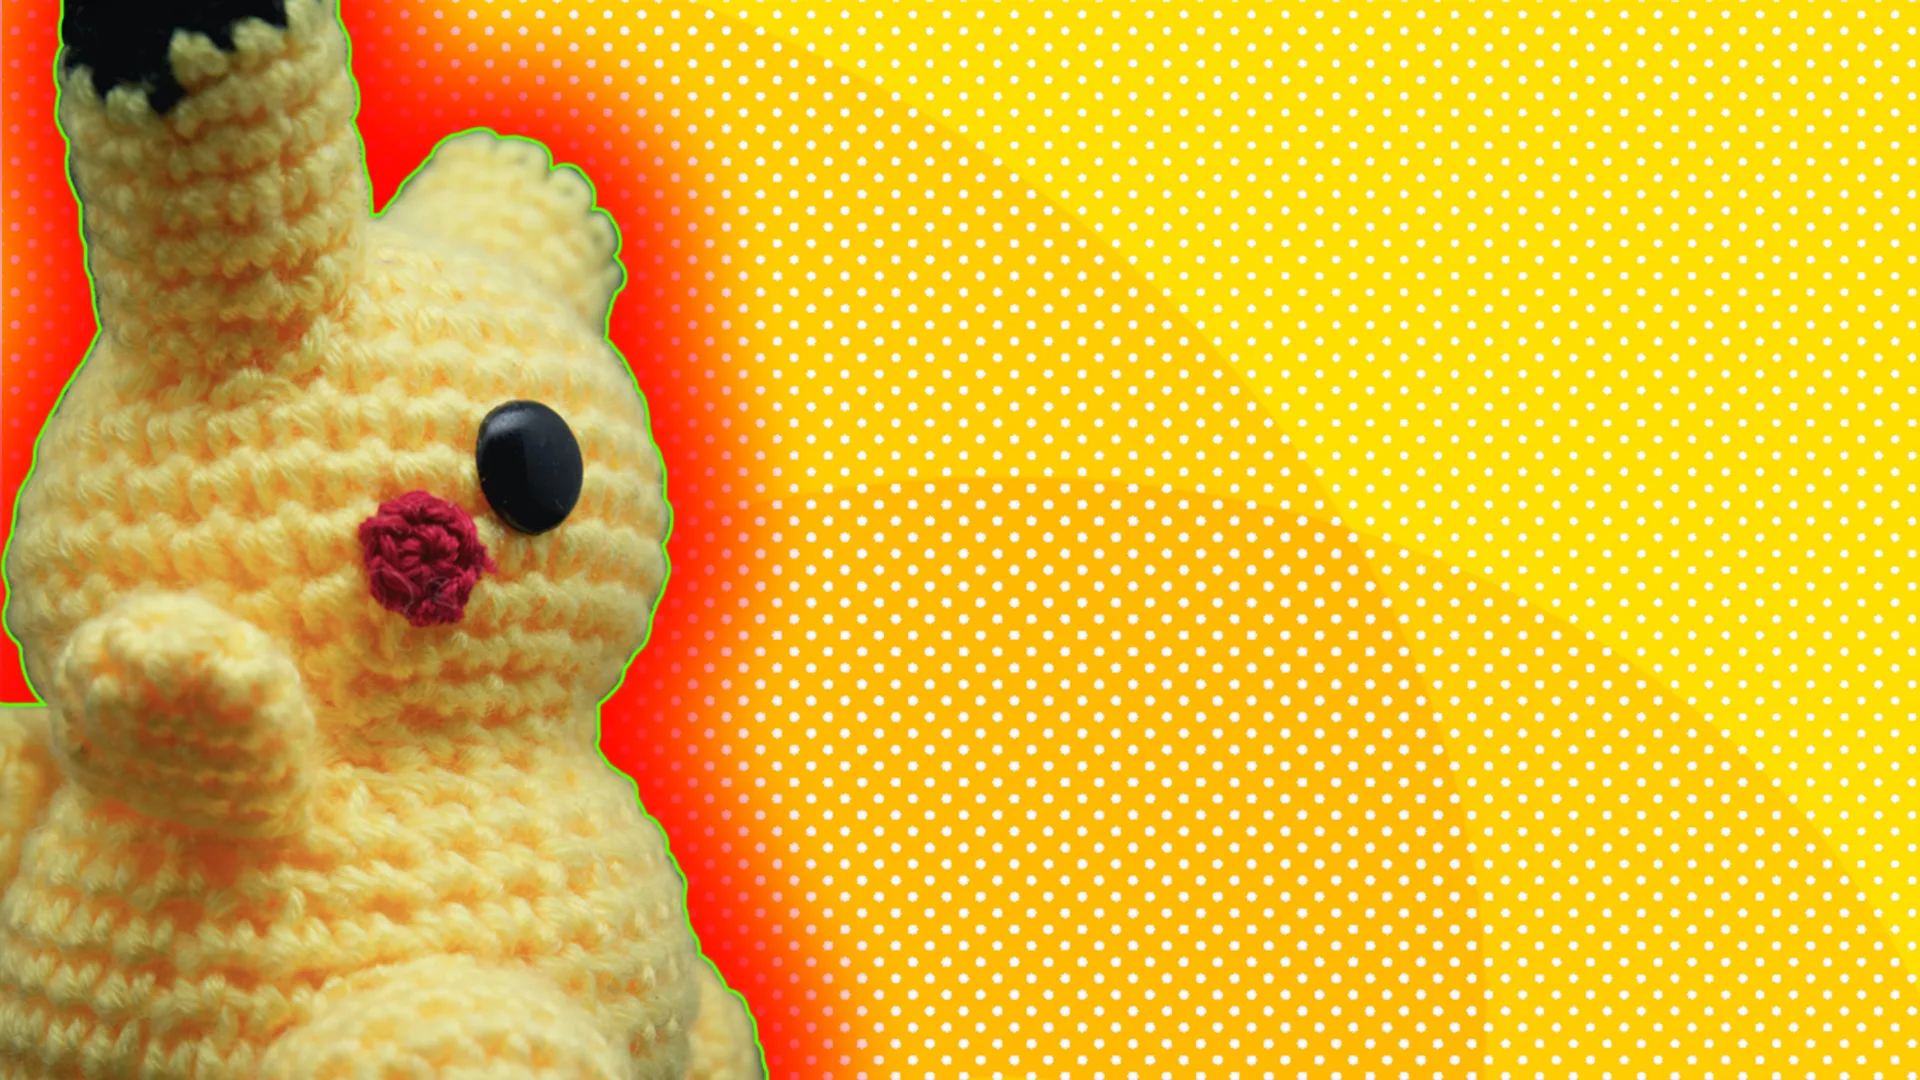 A toy Pokemon teddy with a red glow on a yellow background